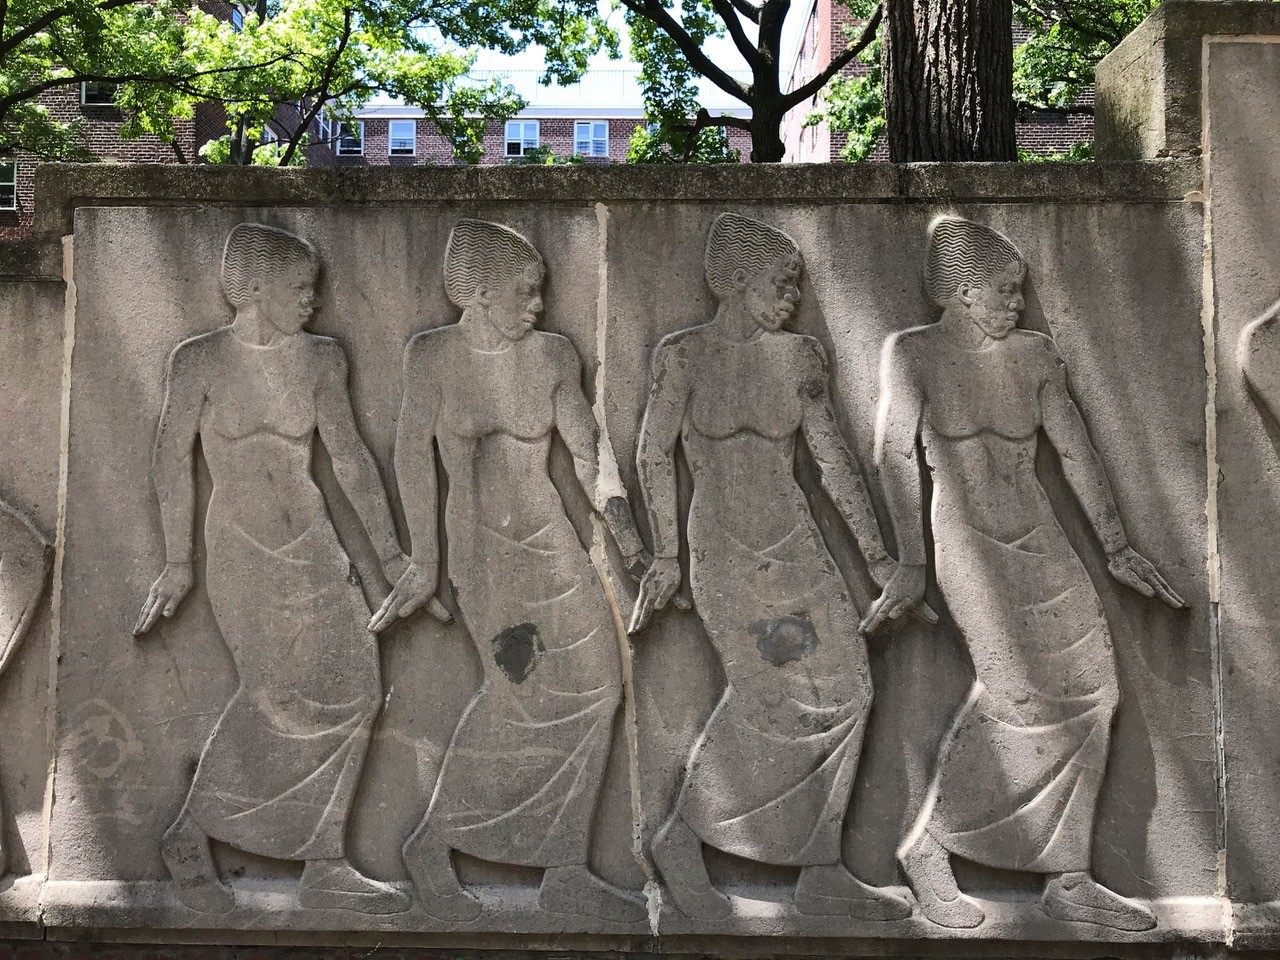 a Photograph of a detail of Richmond Barthé's Exodus and Dance frieze at Kingsborough Houses